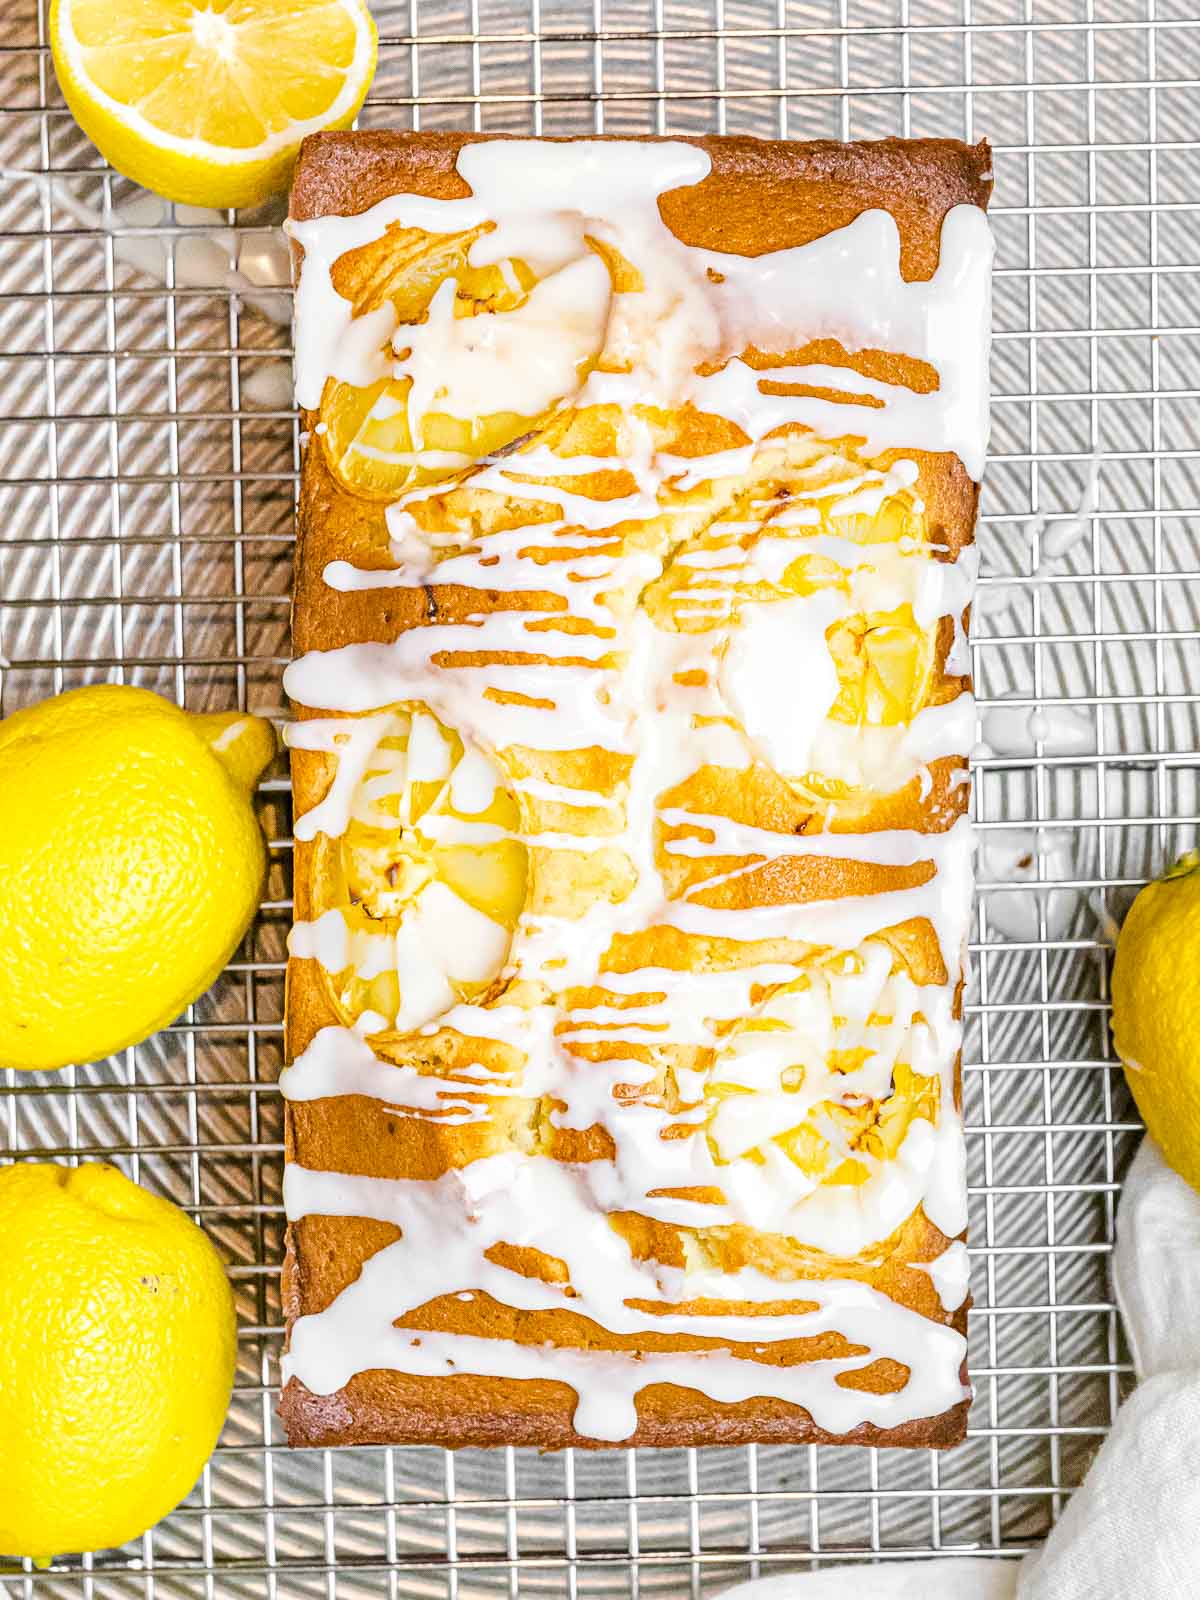 glazed lemon pound cake with white icing drizzled on top with lemons on the side